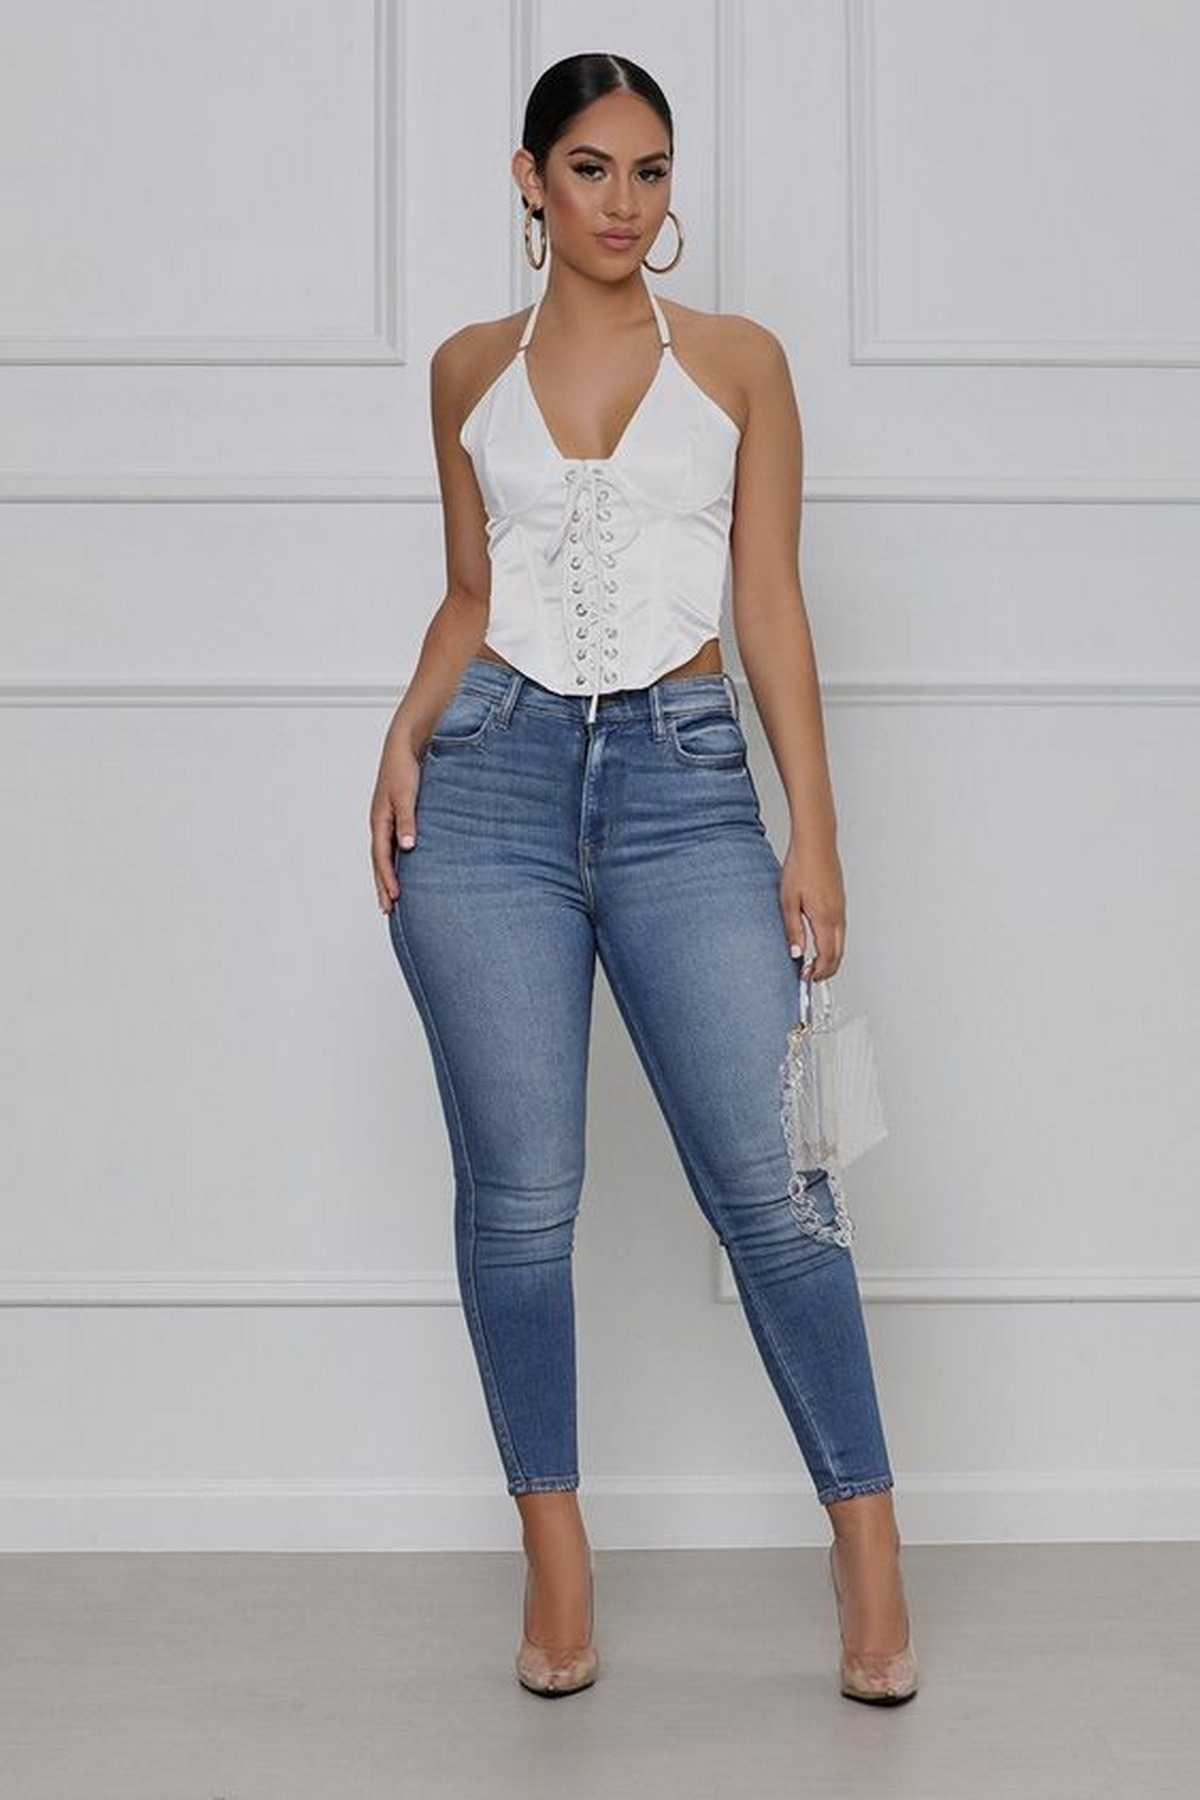 Satin Corset Crop And Jeans